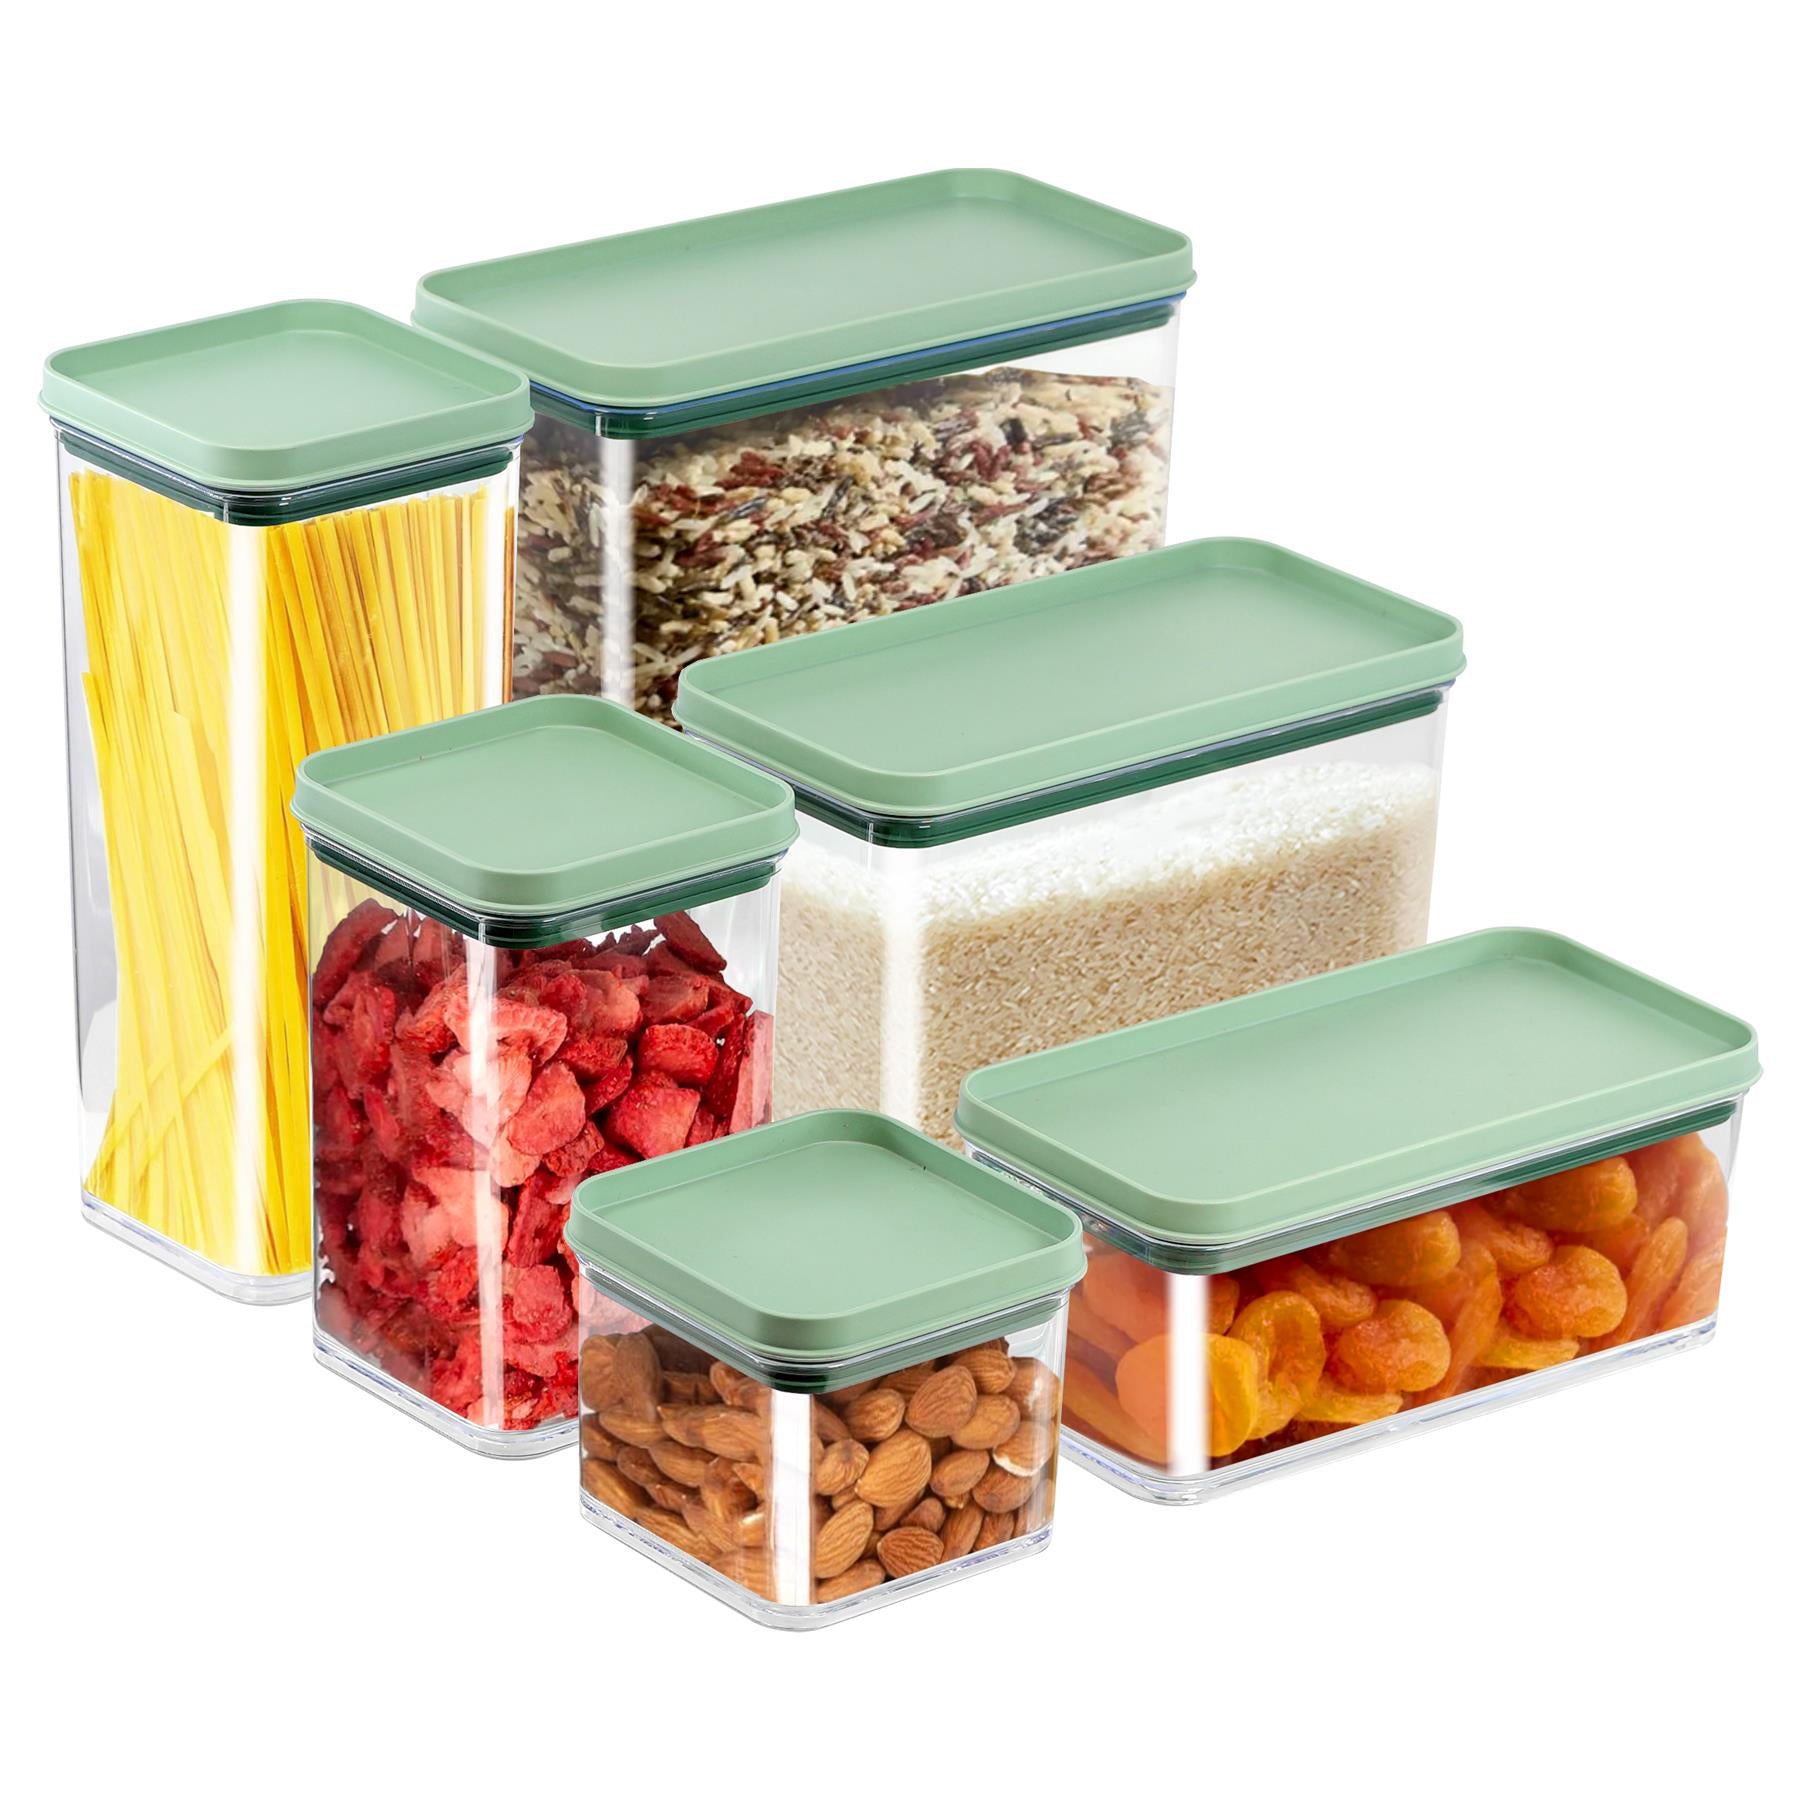 GEEZY Food Storage Containers Set of 6